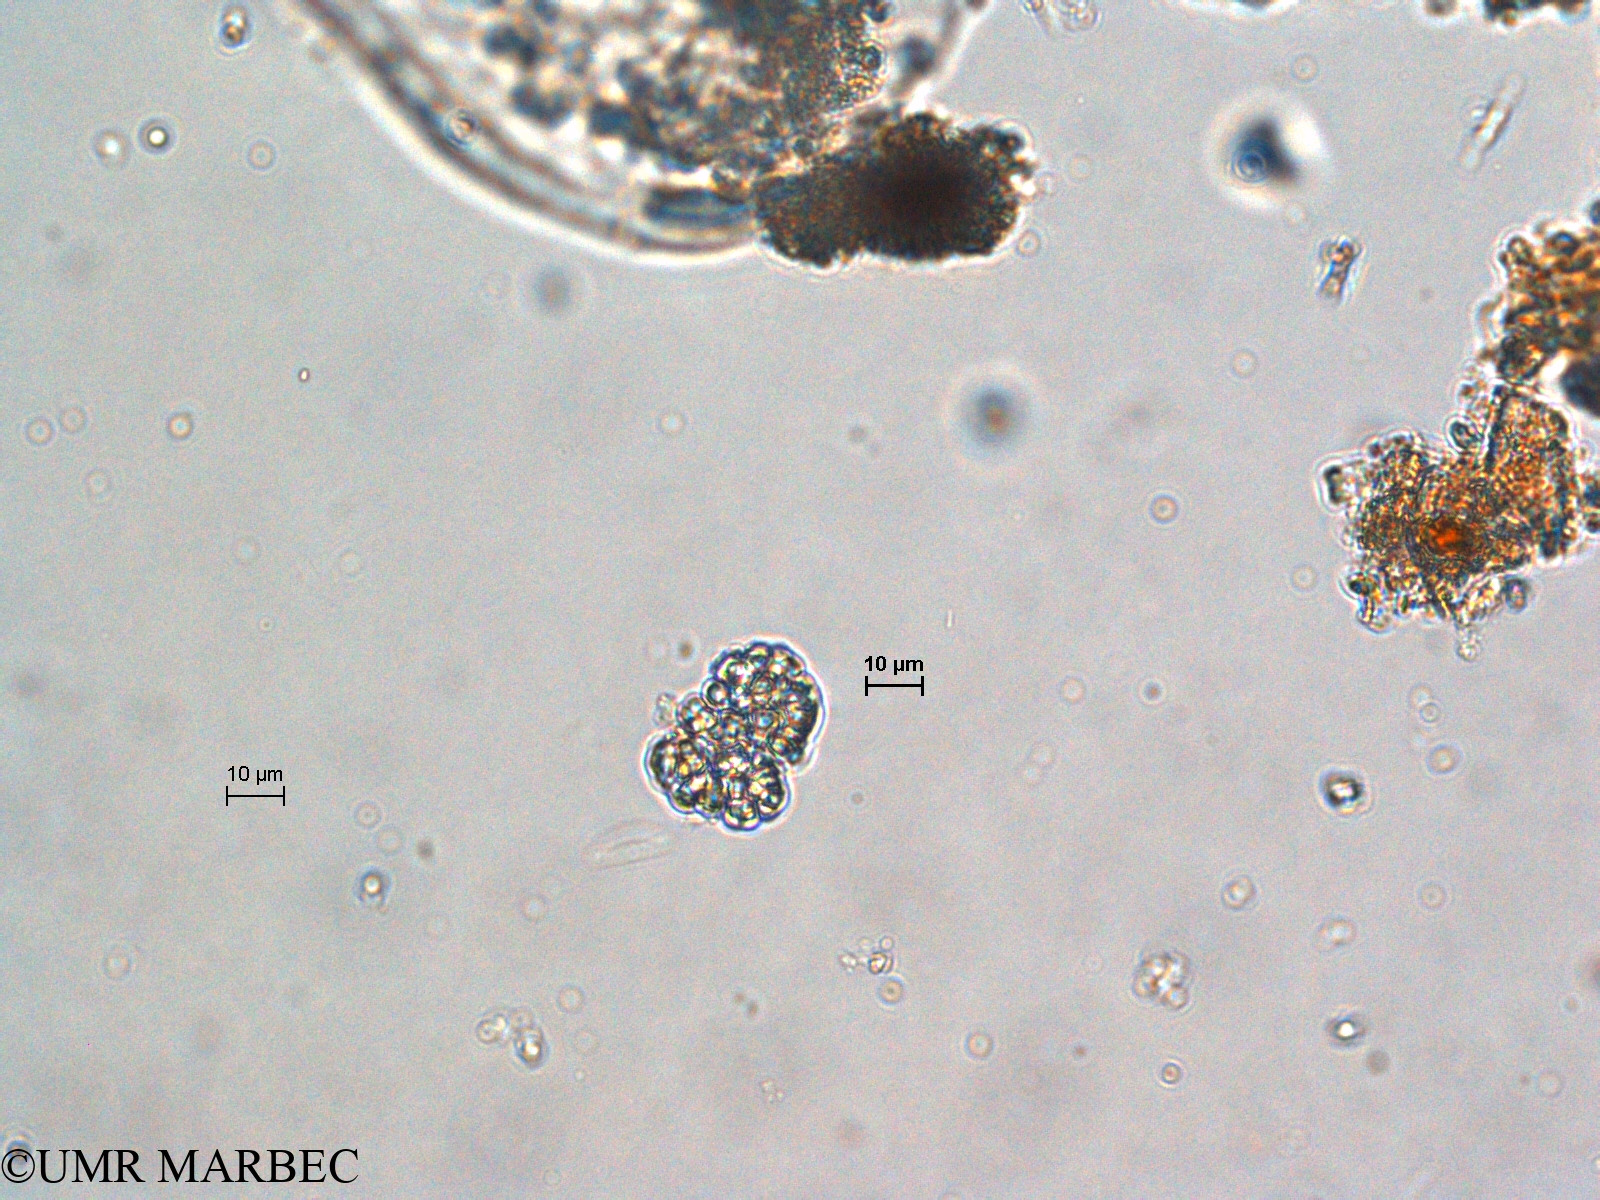 phyto/Scattered_Islands/europa/COMMA April 2011/Chroococcus sp3 (-1)(copy).jpg